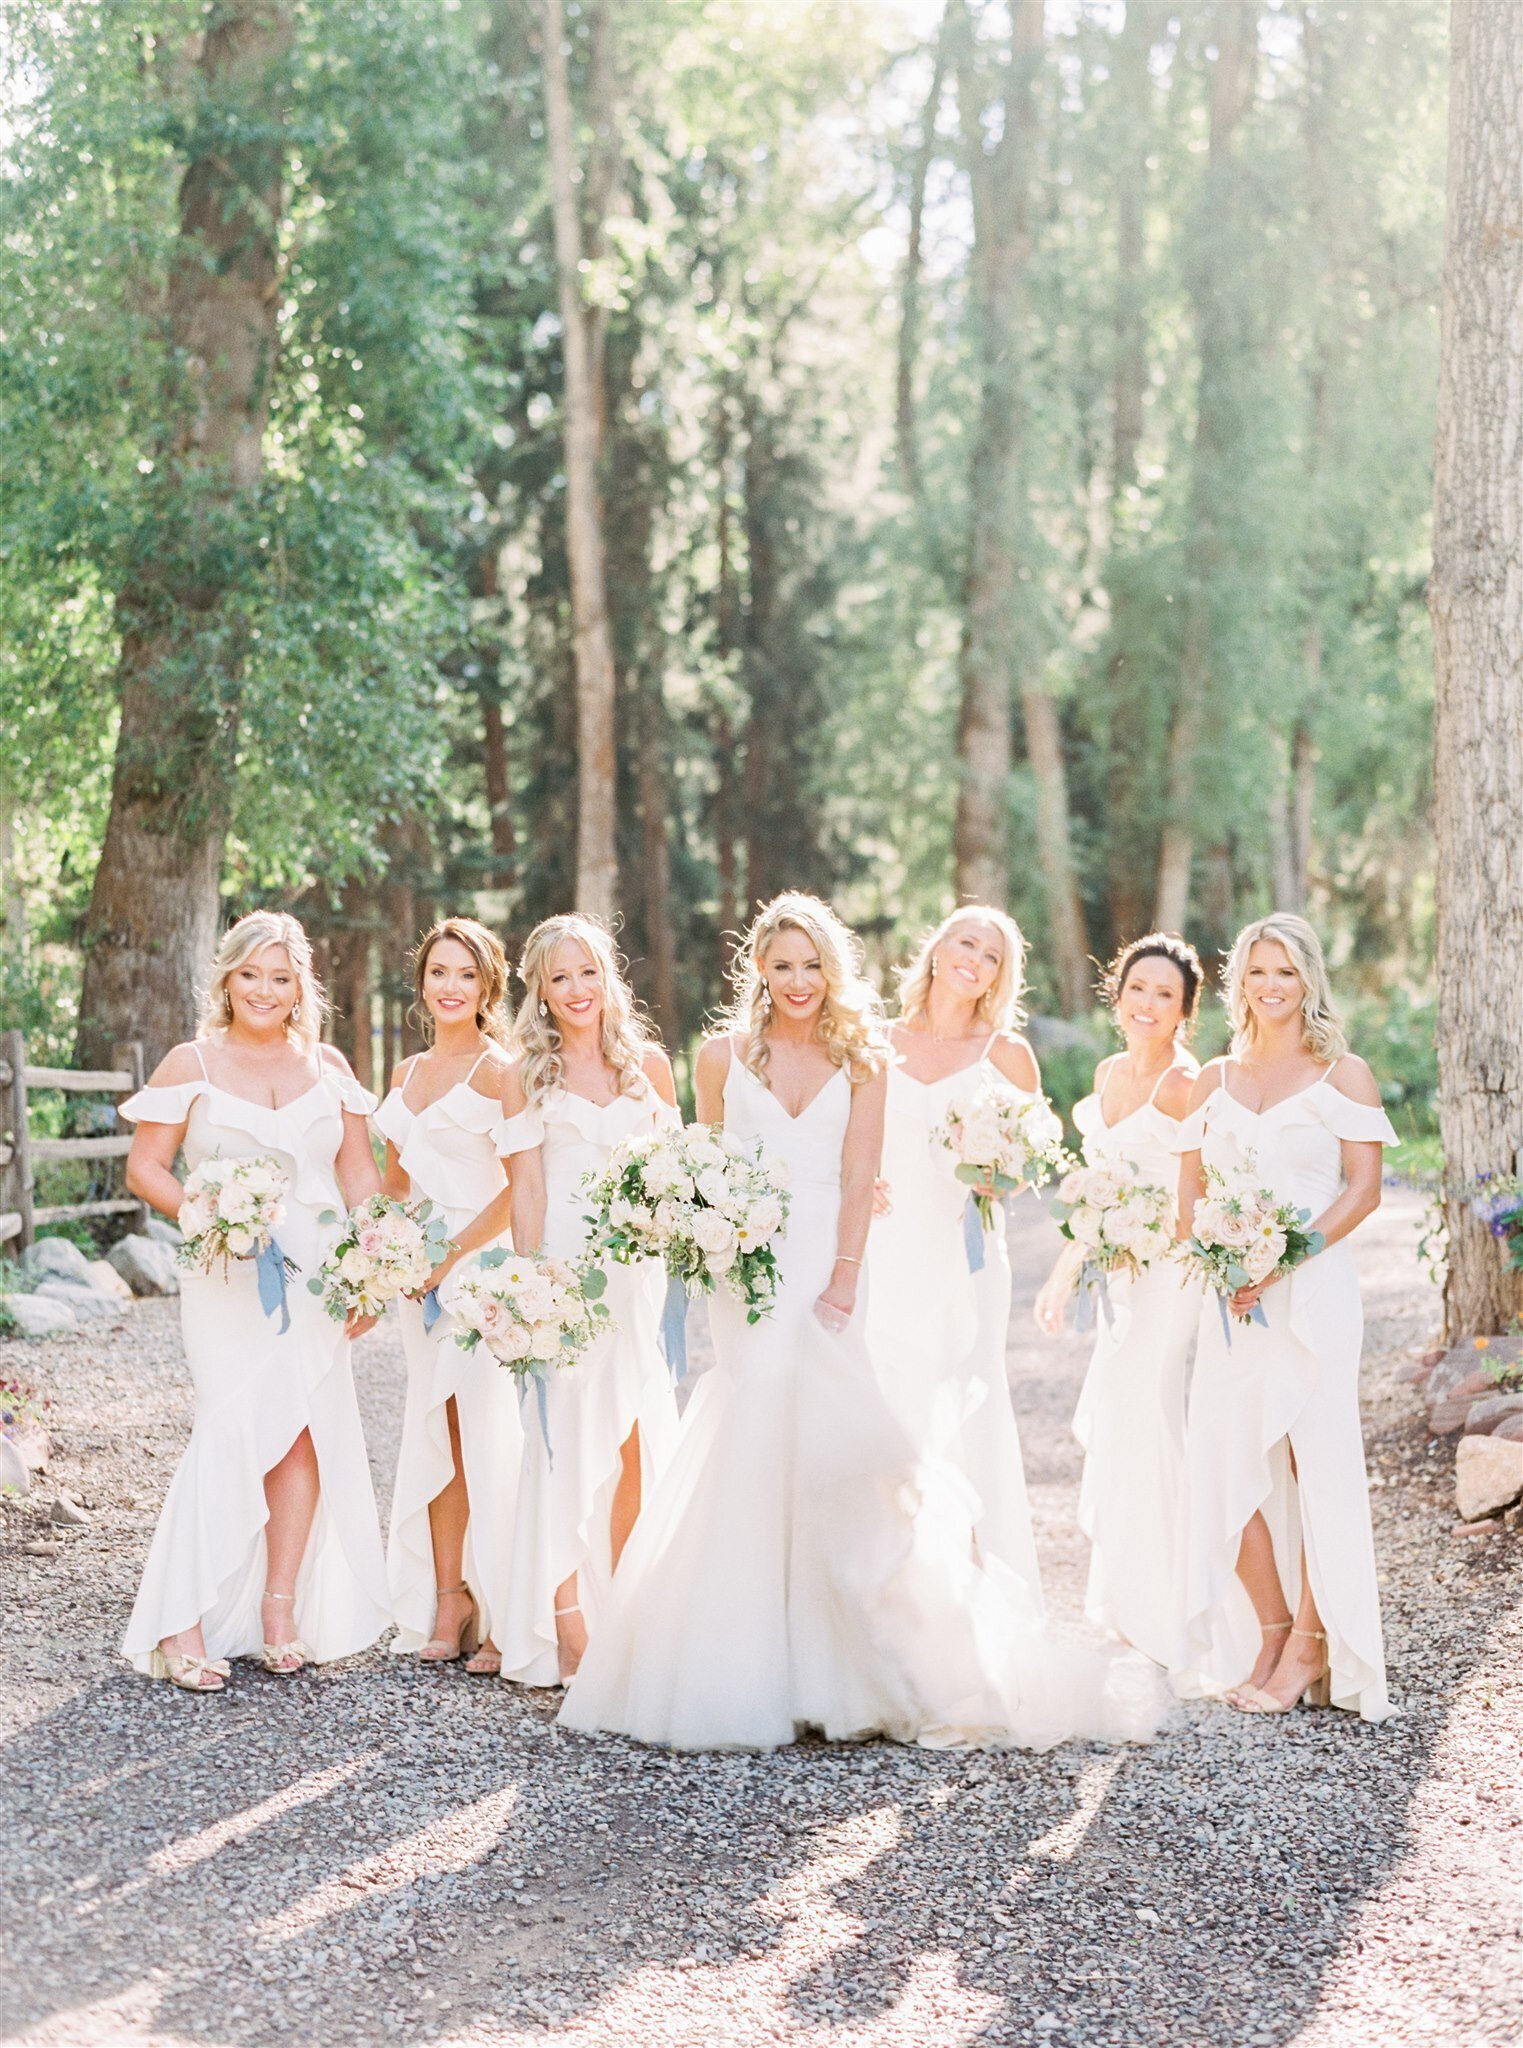 Happy bridal party in a treed outdoor setting